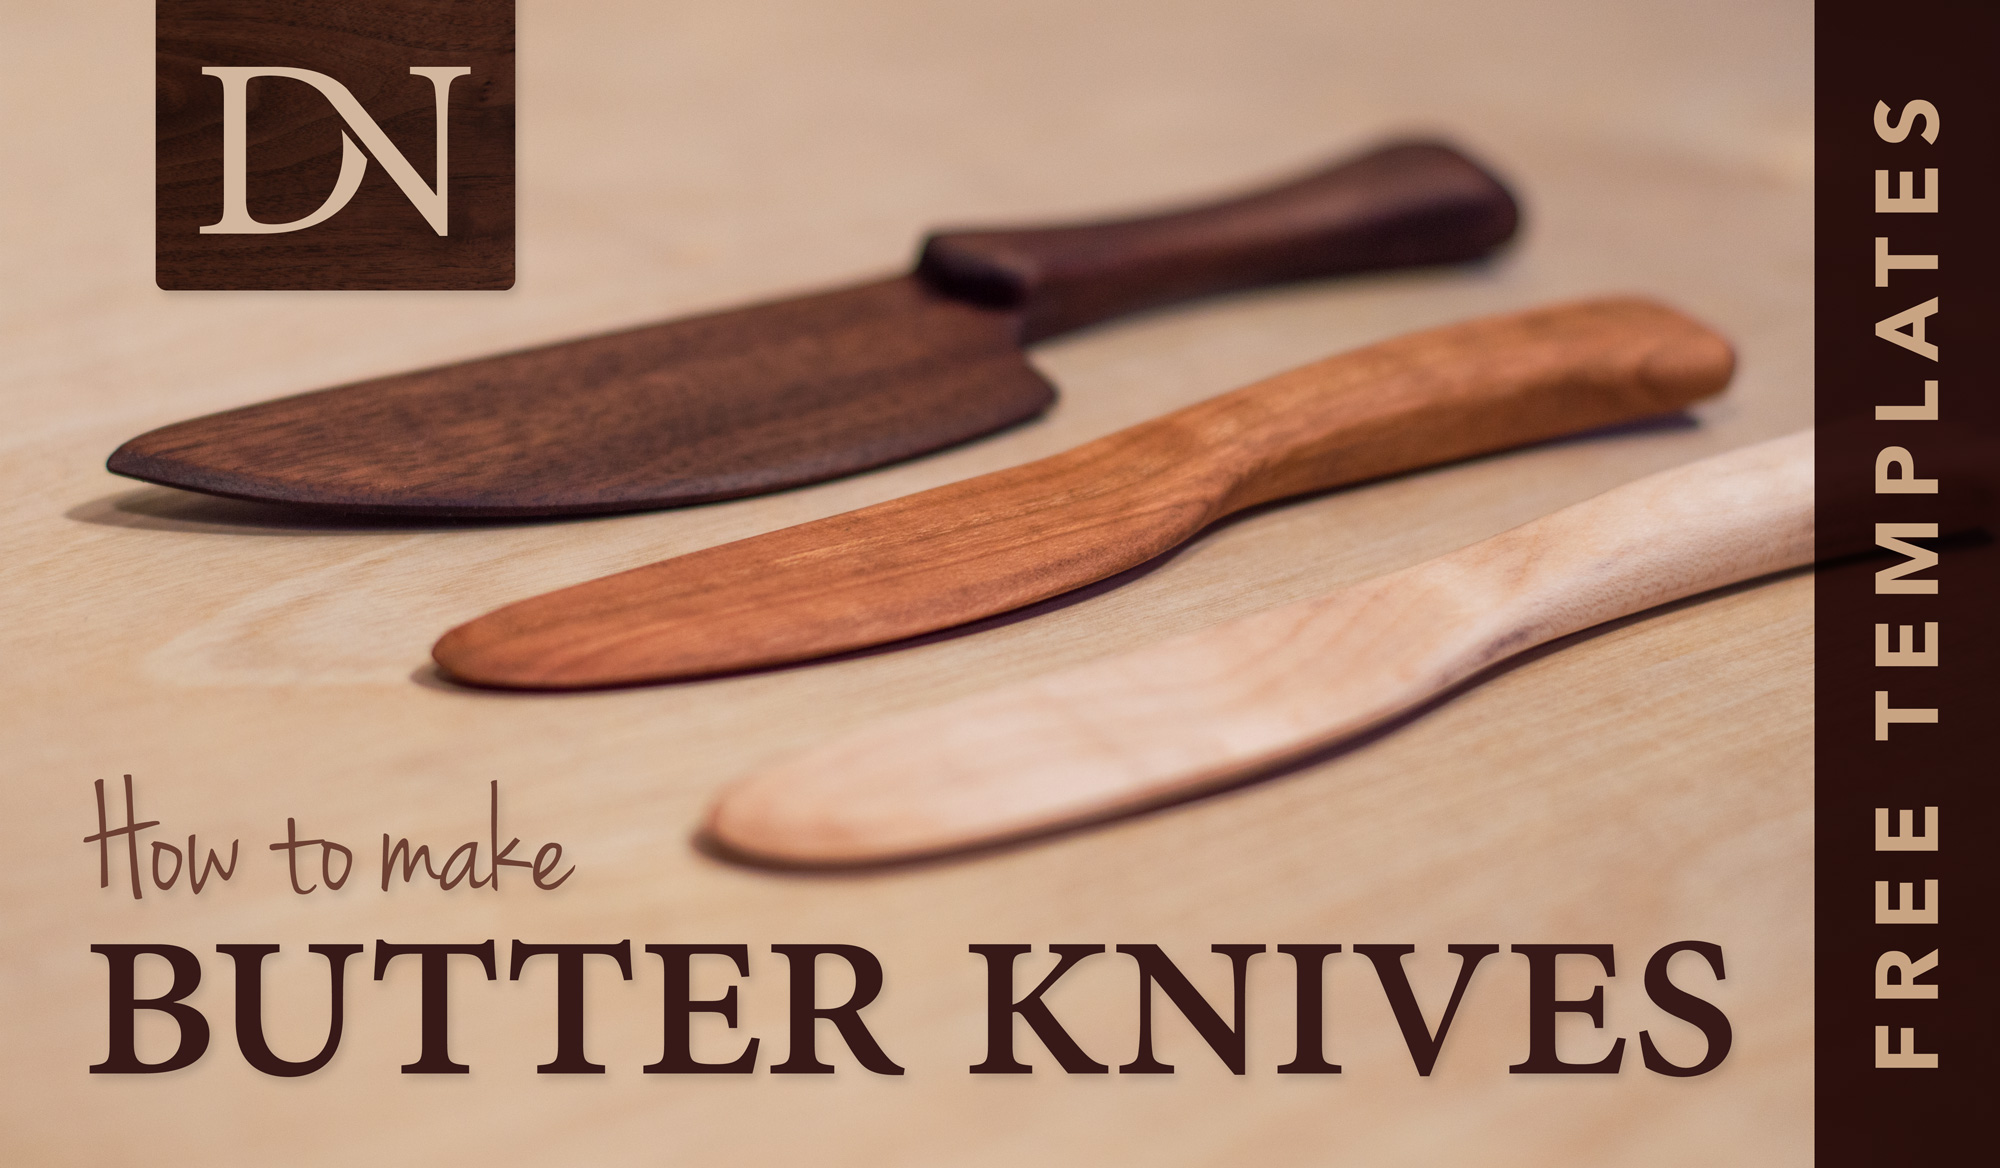 Make Butter Knives | DN Handcrafted